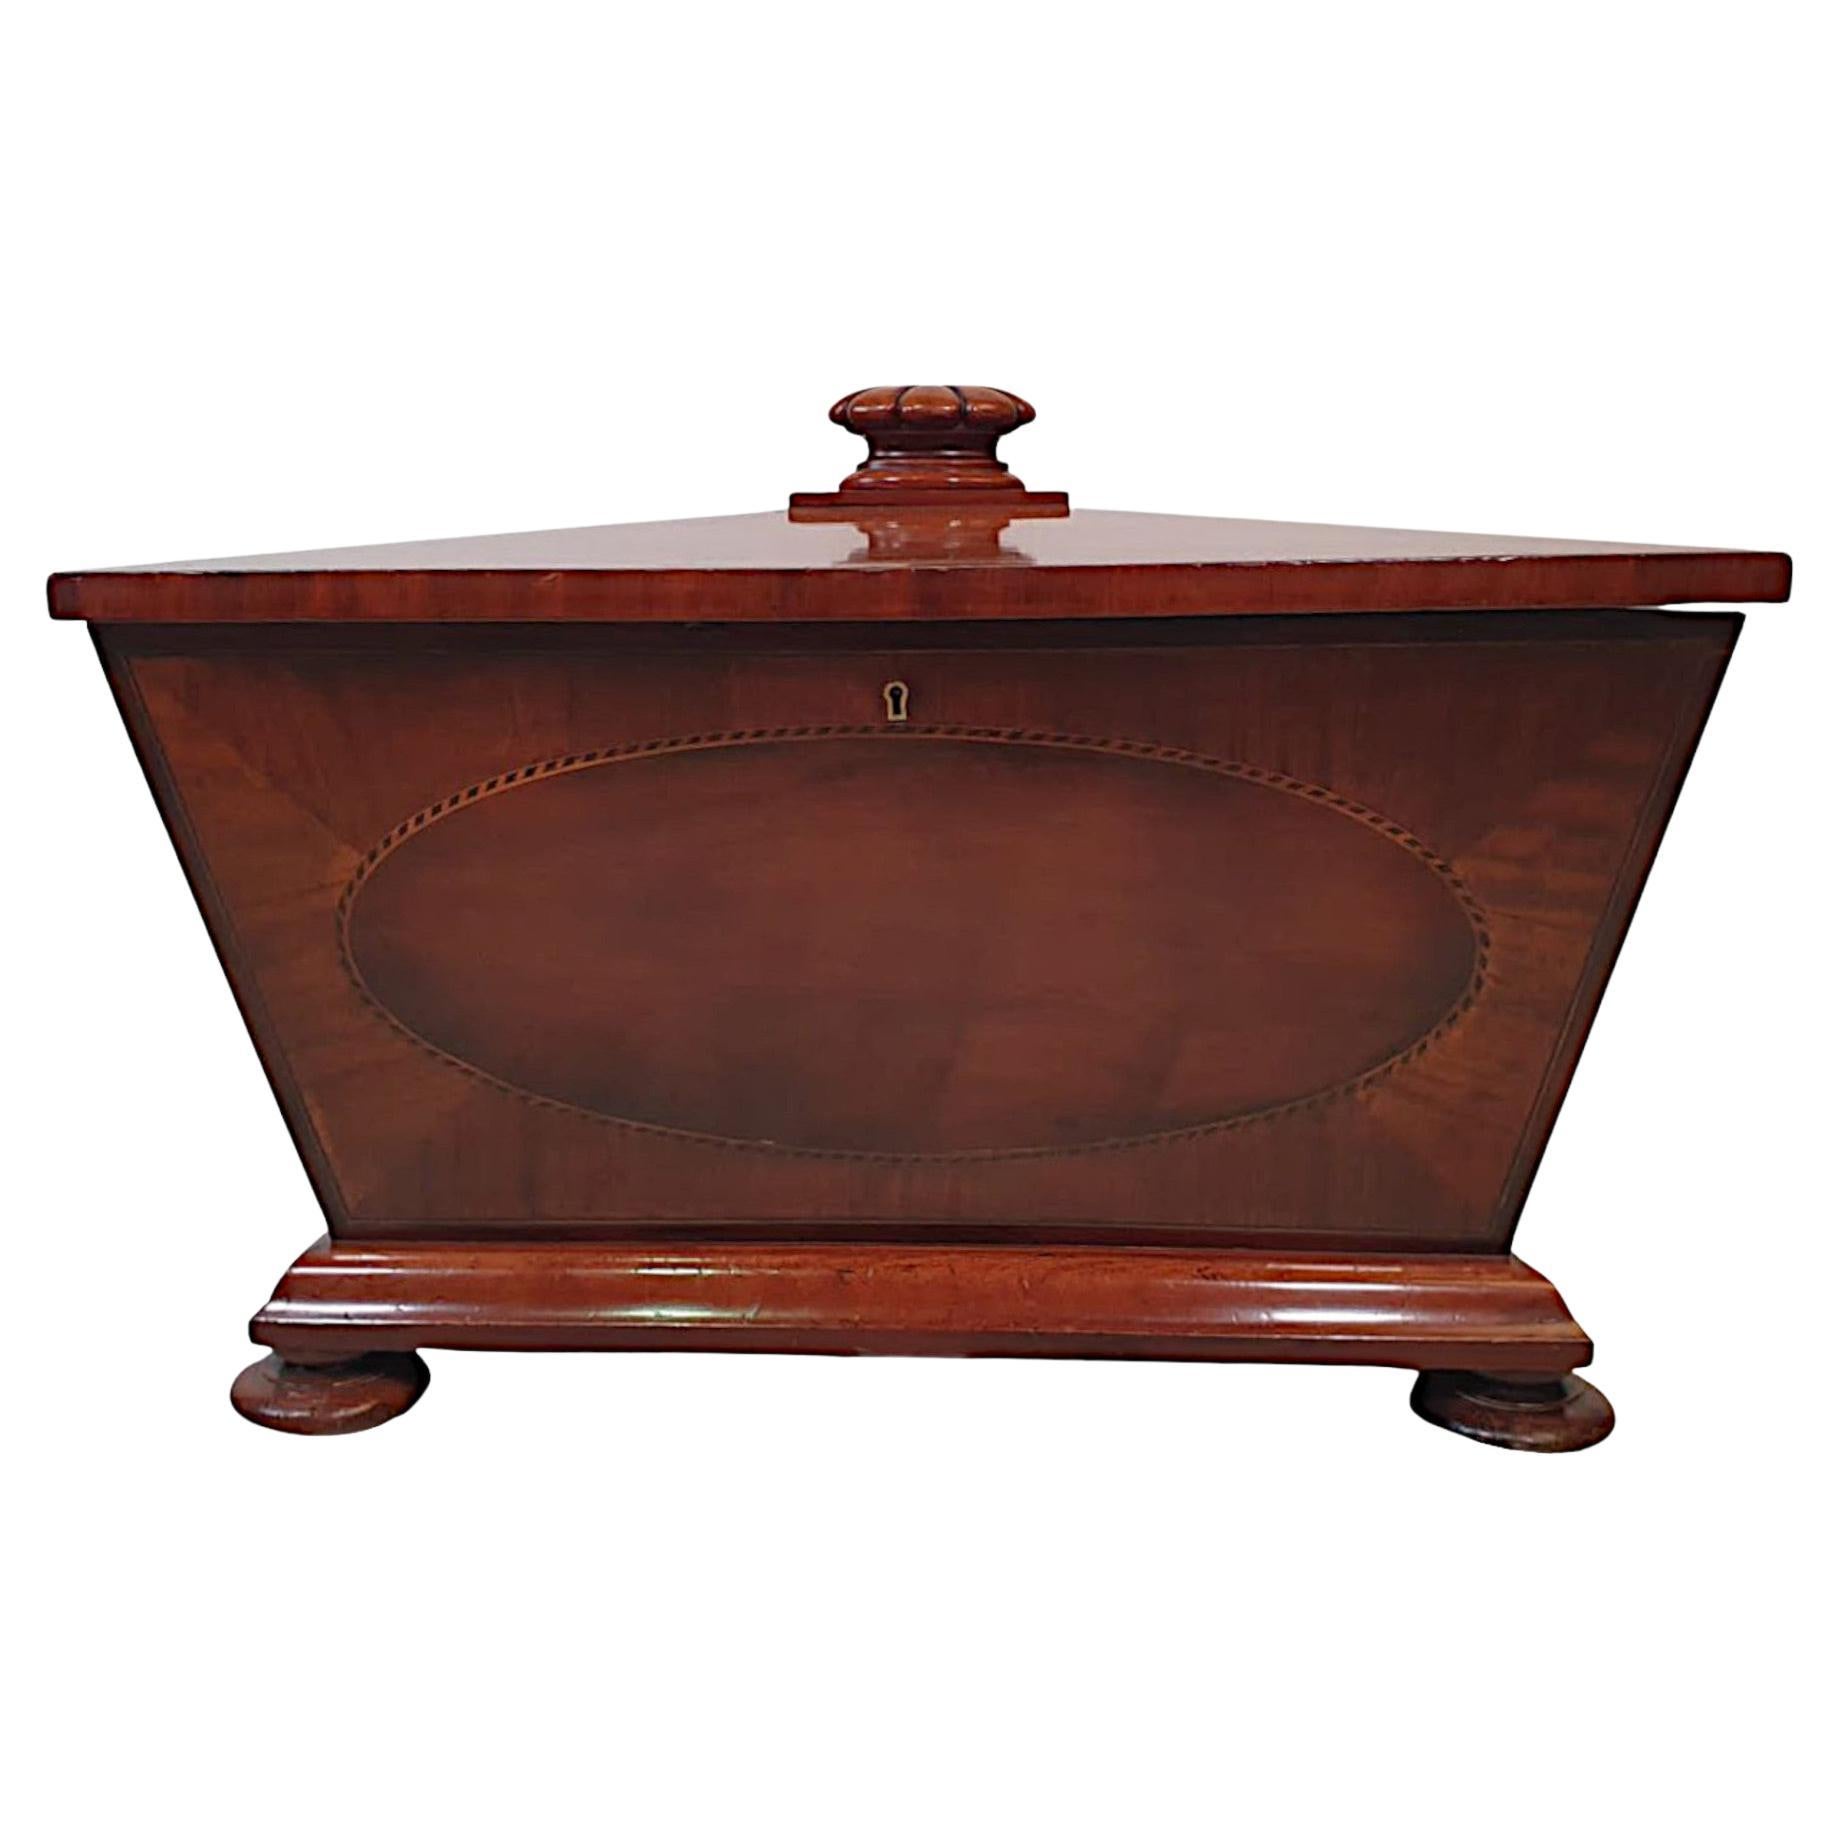 A very fine late 19th century beautifully figured mahogany sarcophogas shaped cellarette or wine cooler by Freeman's of Norwich. The hinged lid with gorgeous line inlay and a gadrooned finial handle, opening to reveal a fitted bottle holder section.